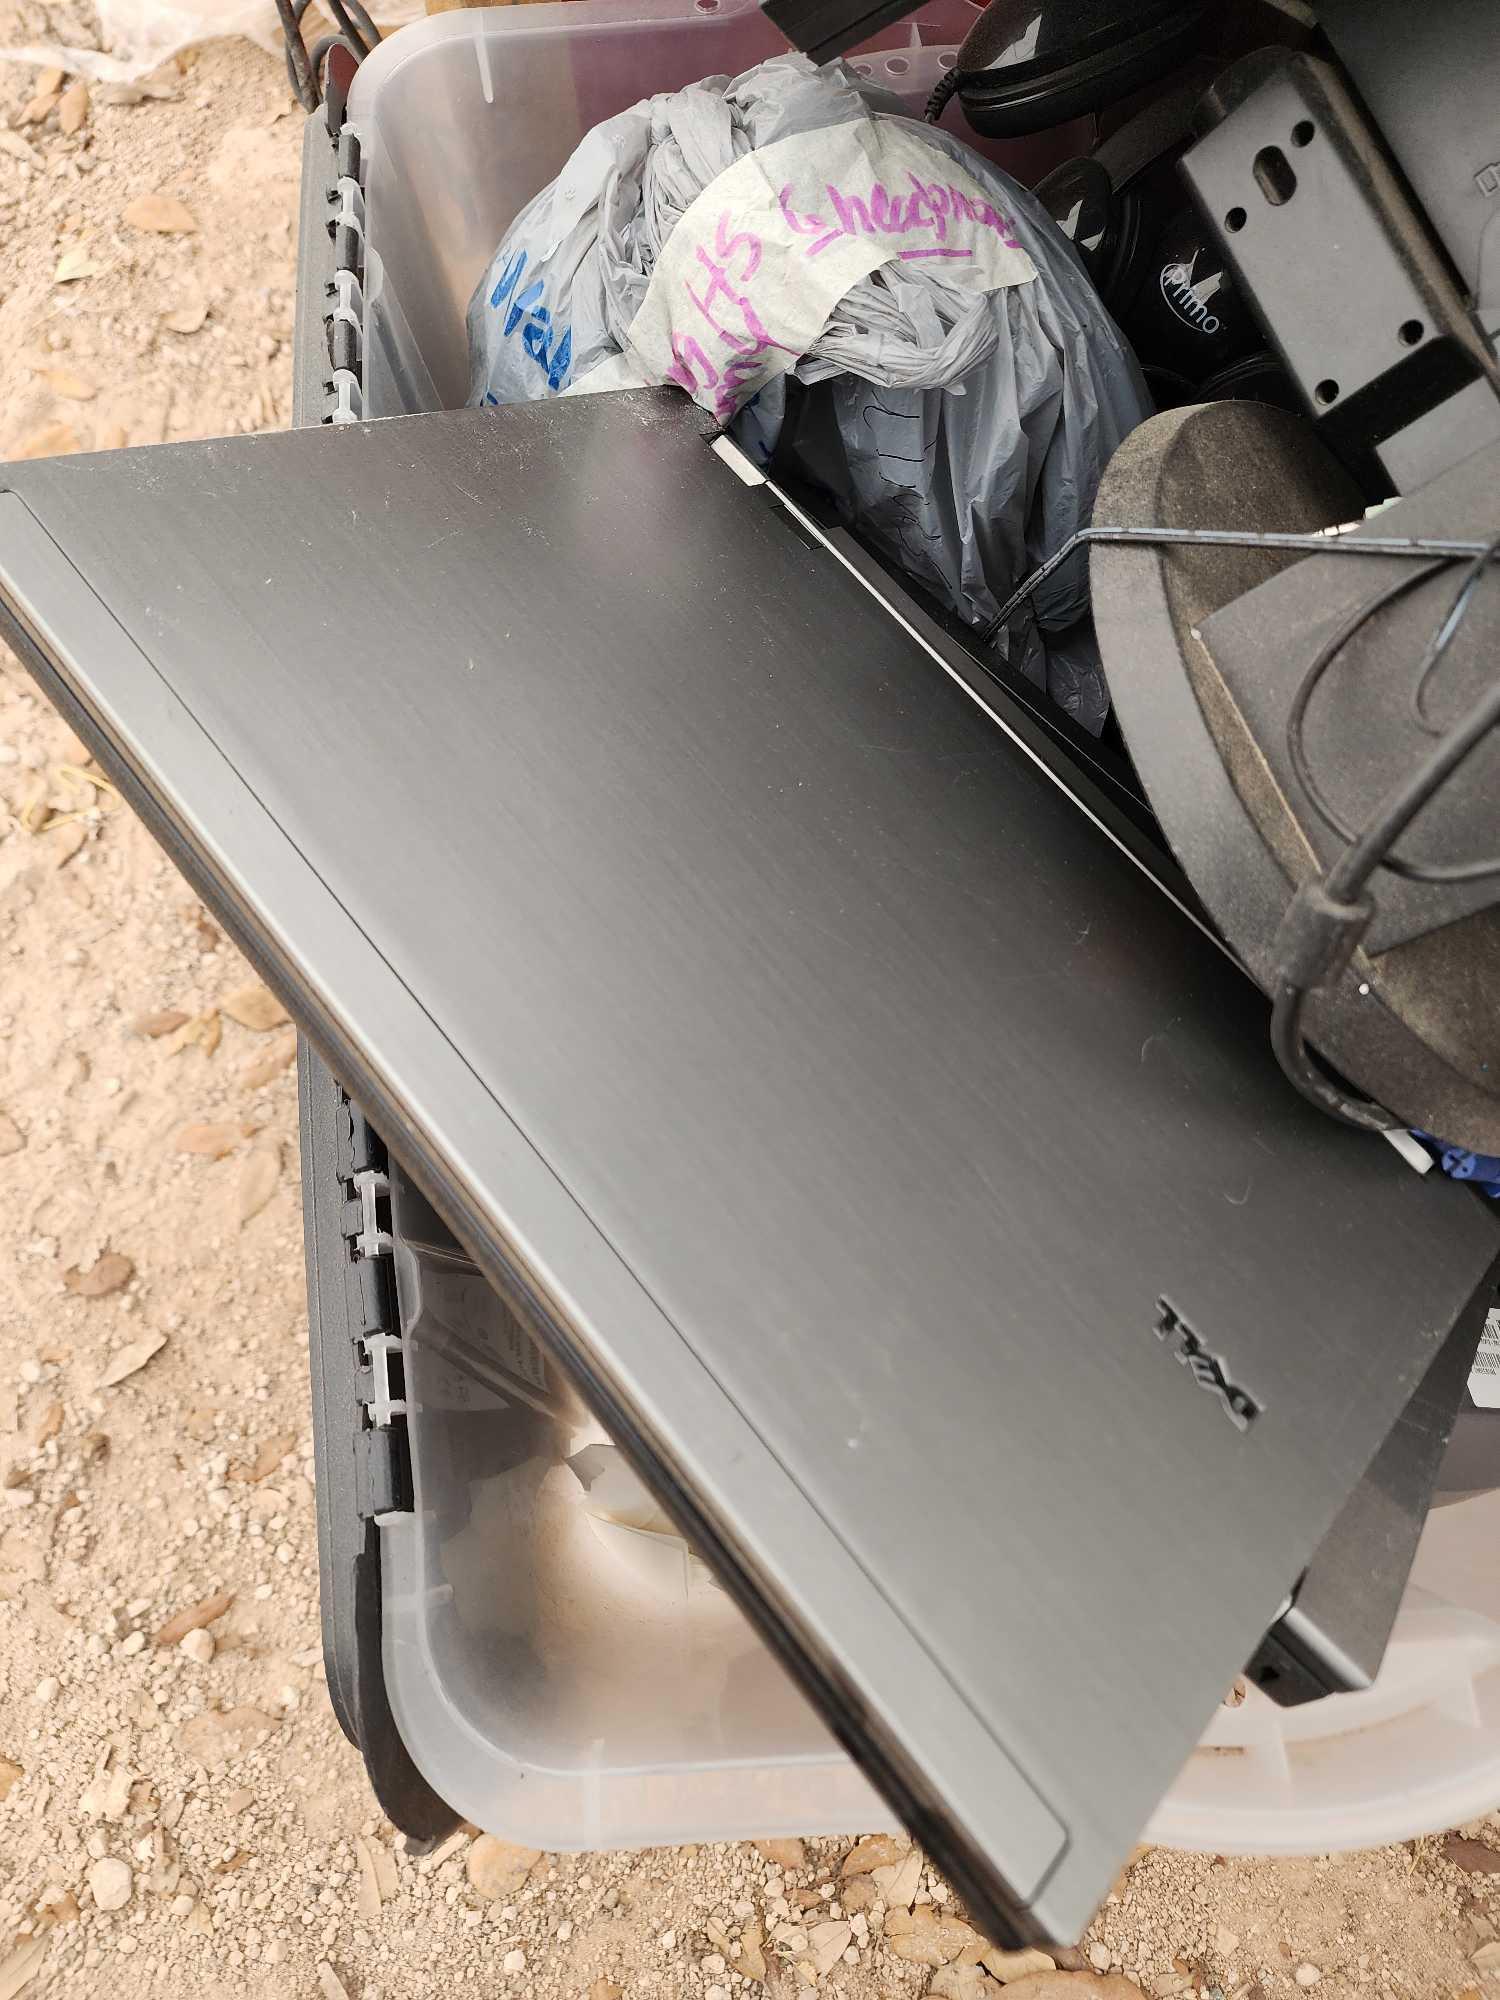 Sony Stereo System, Group of Dell Laptops, Group of Dell Monitors, (1) Oki Printer, Group of PC's